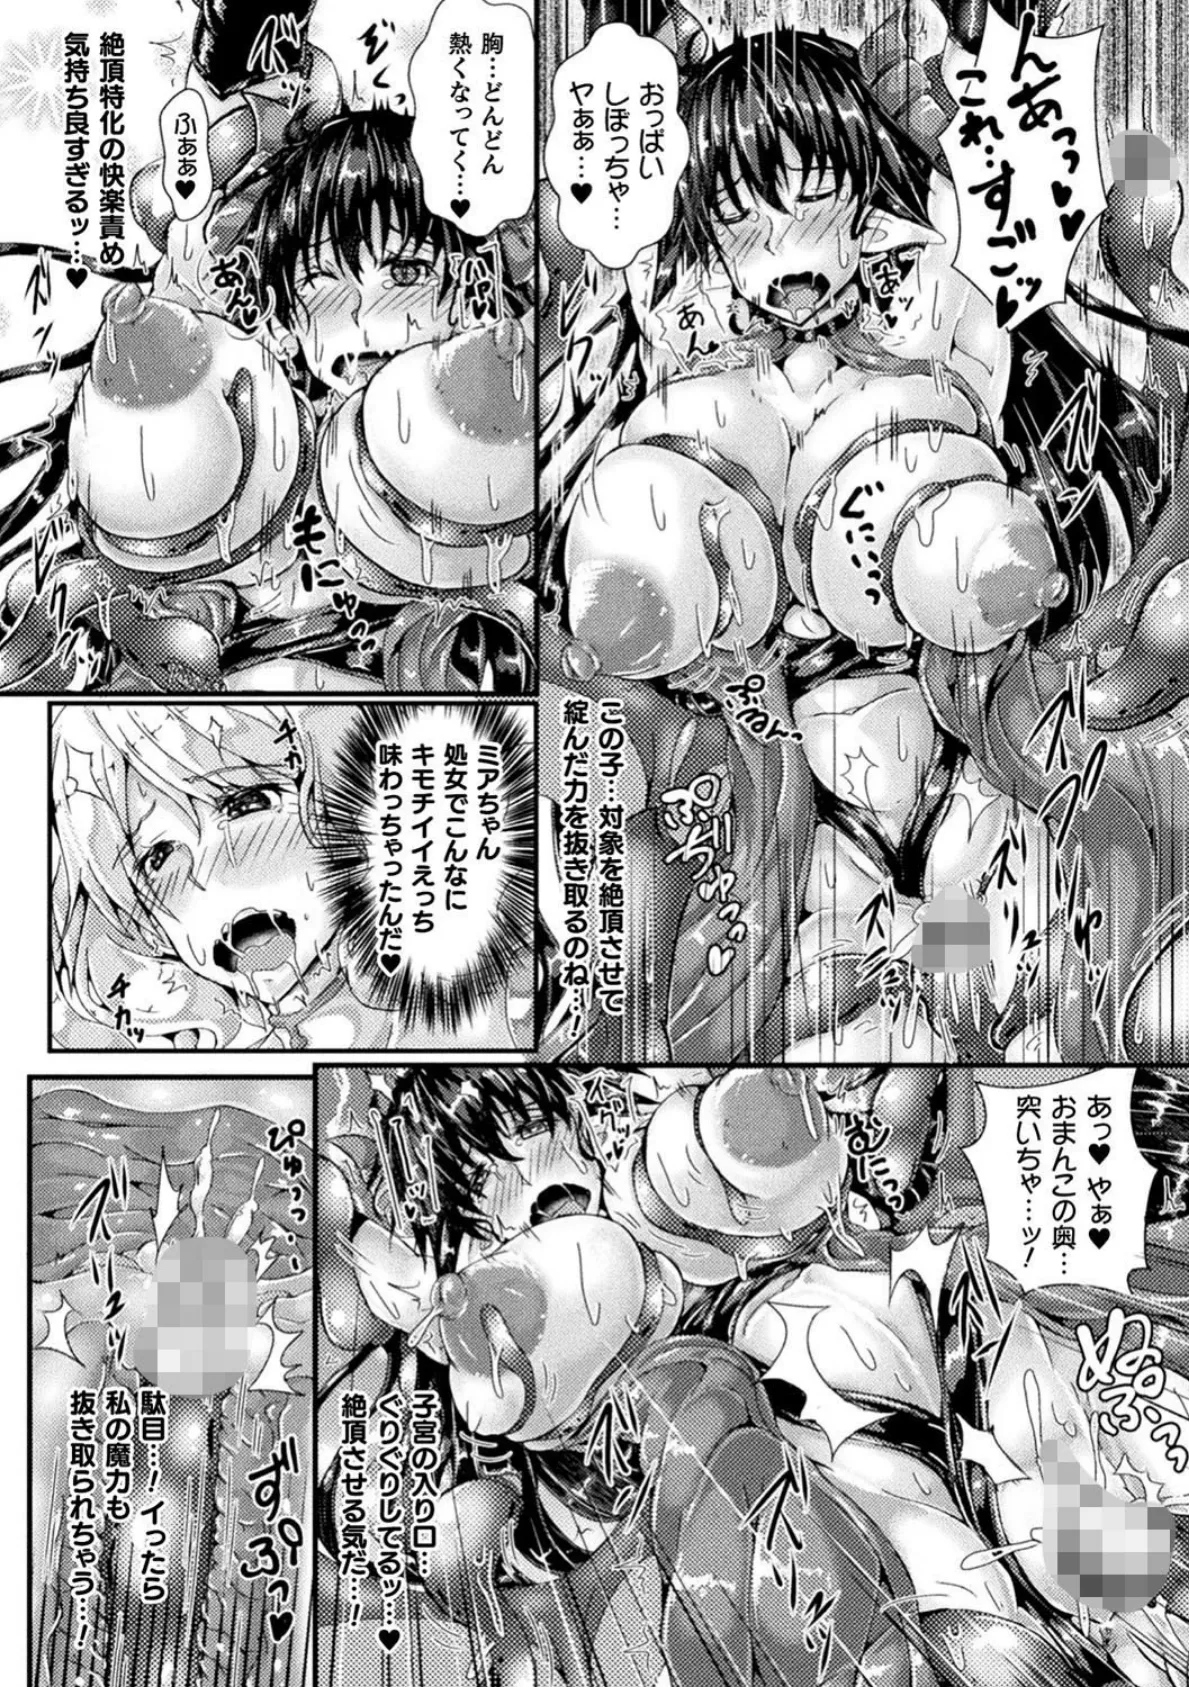 Corrupted Maiden 〜淫欲に堕ちる戦姫たち〜【電子書籍限定版】 54ページ